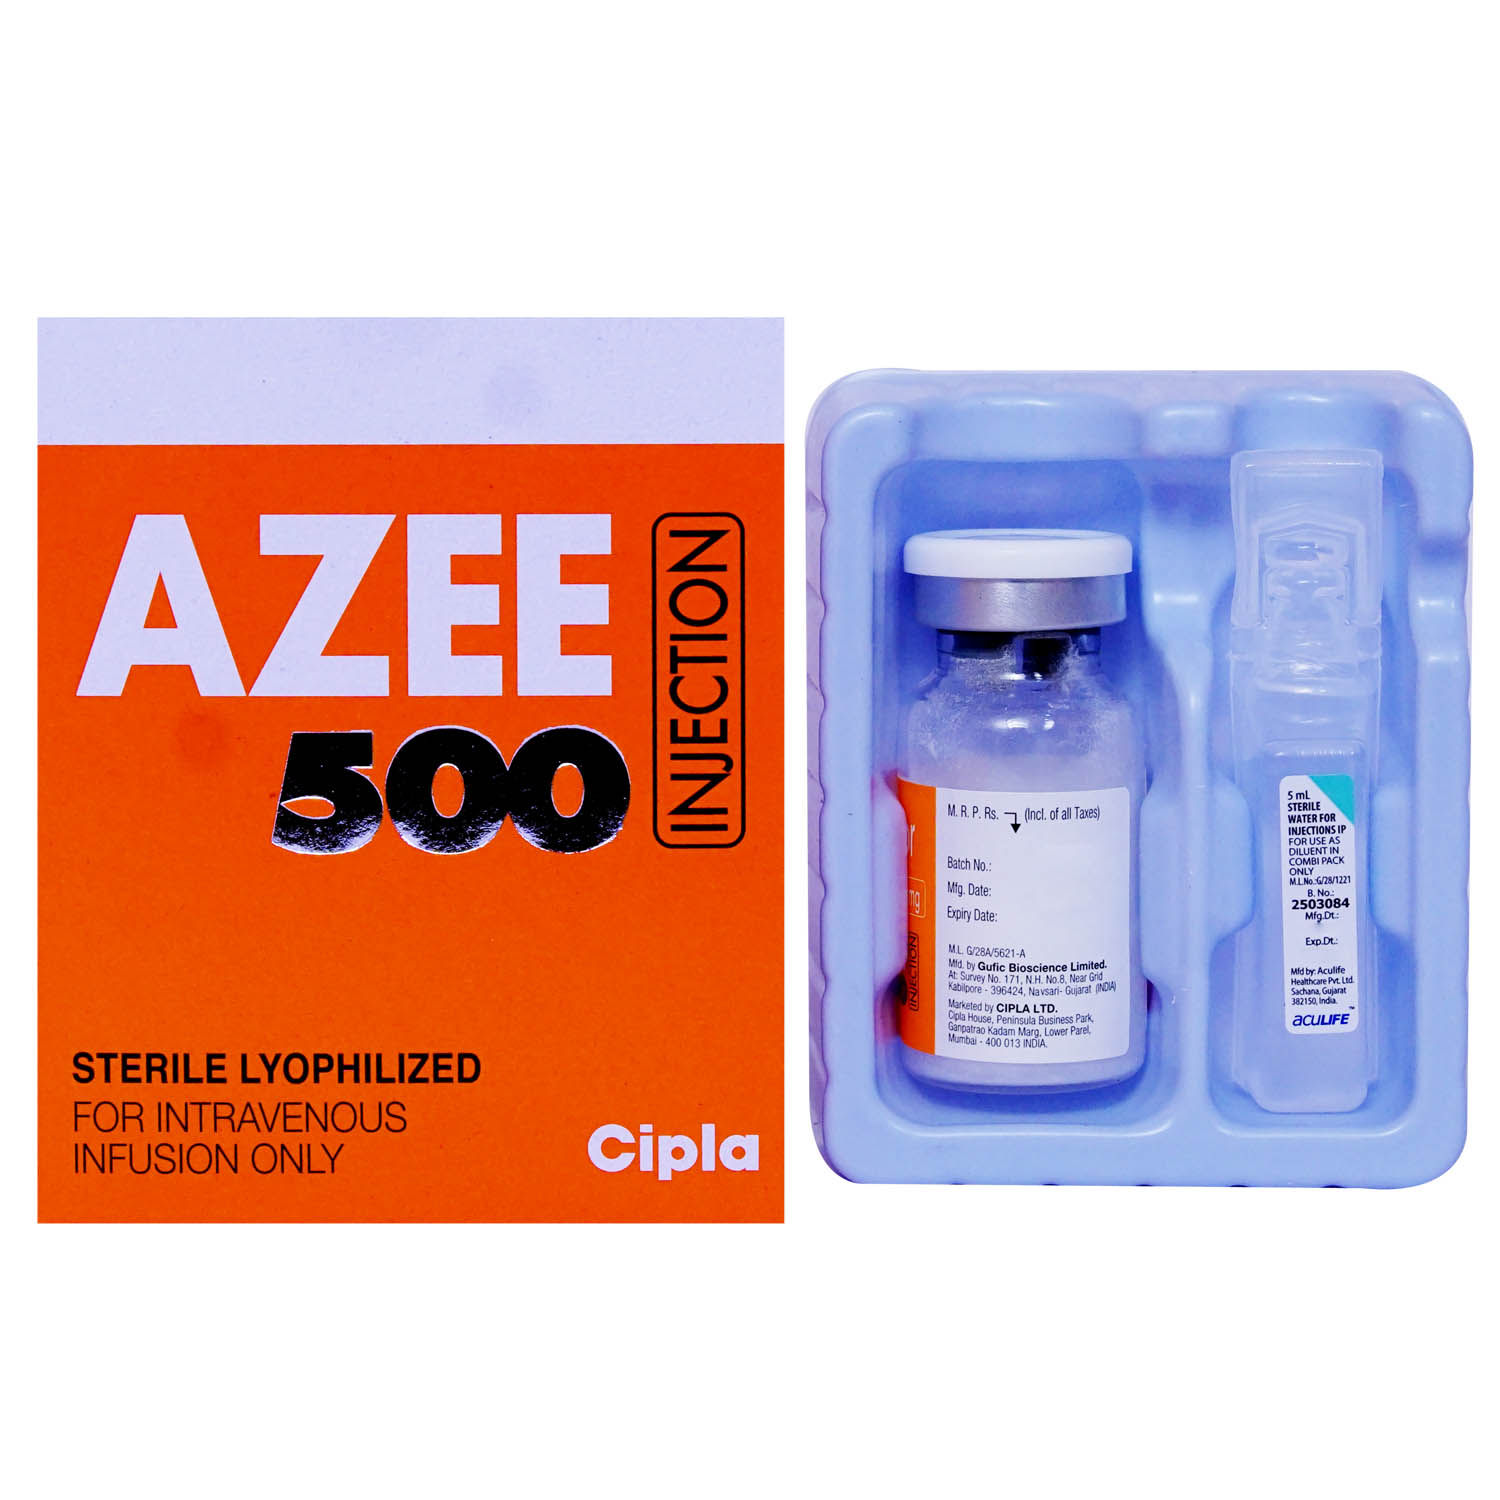 Azee 500 Injection 5 ml, Pack of 1 INJECTION